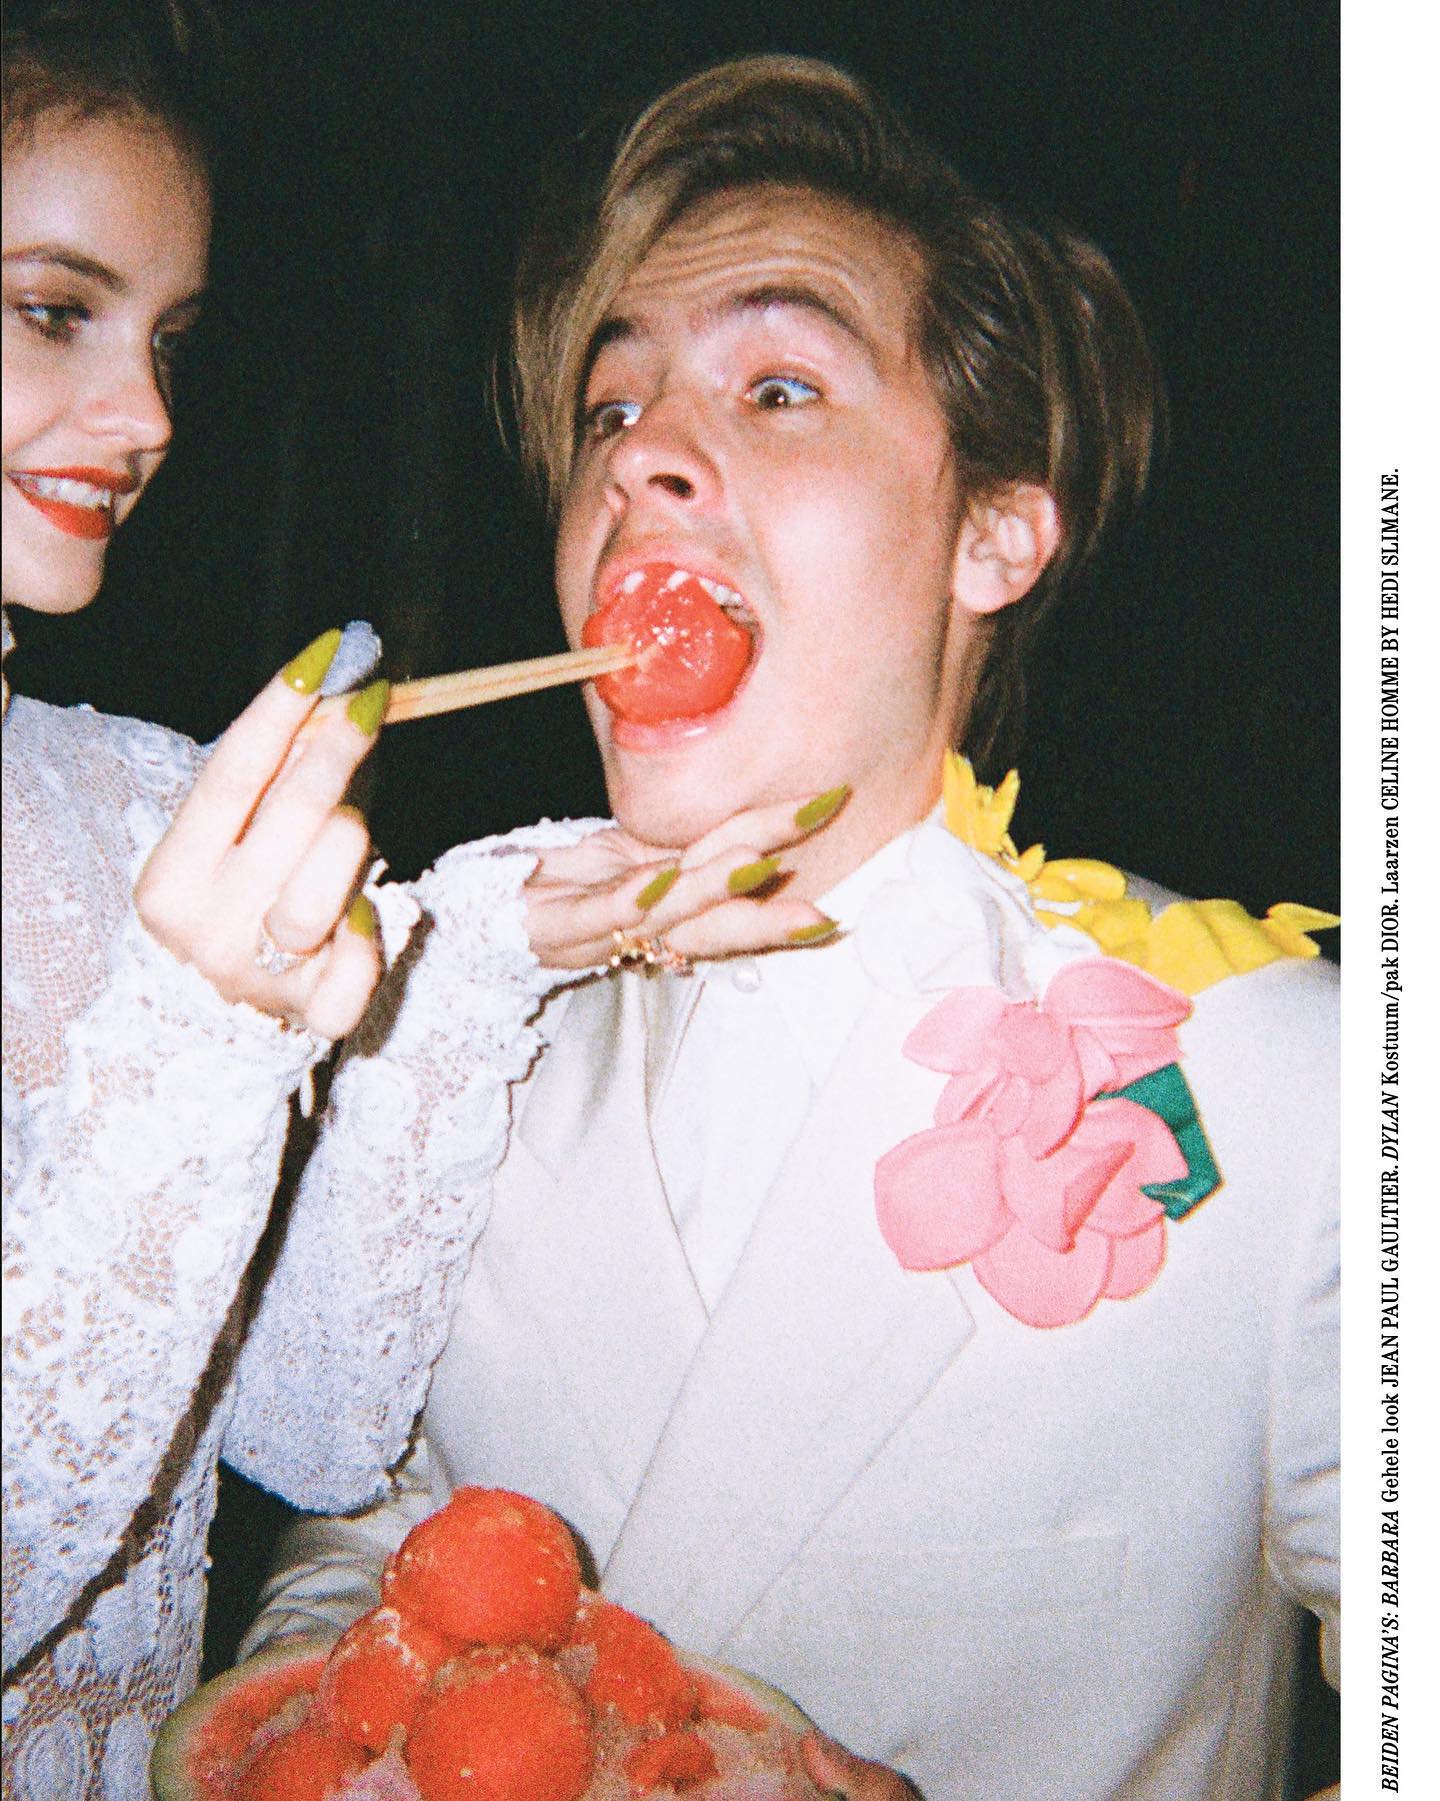 Barbara Palvin y Dylan Sprouse Hit the Cover! - Photo 5